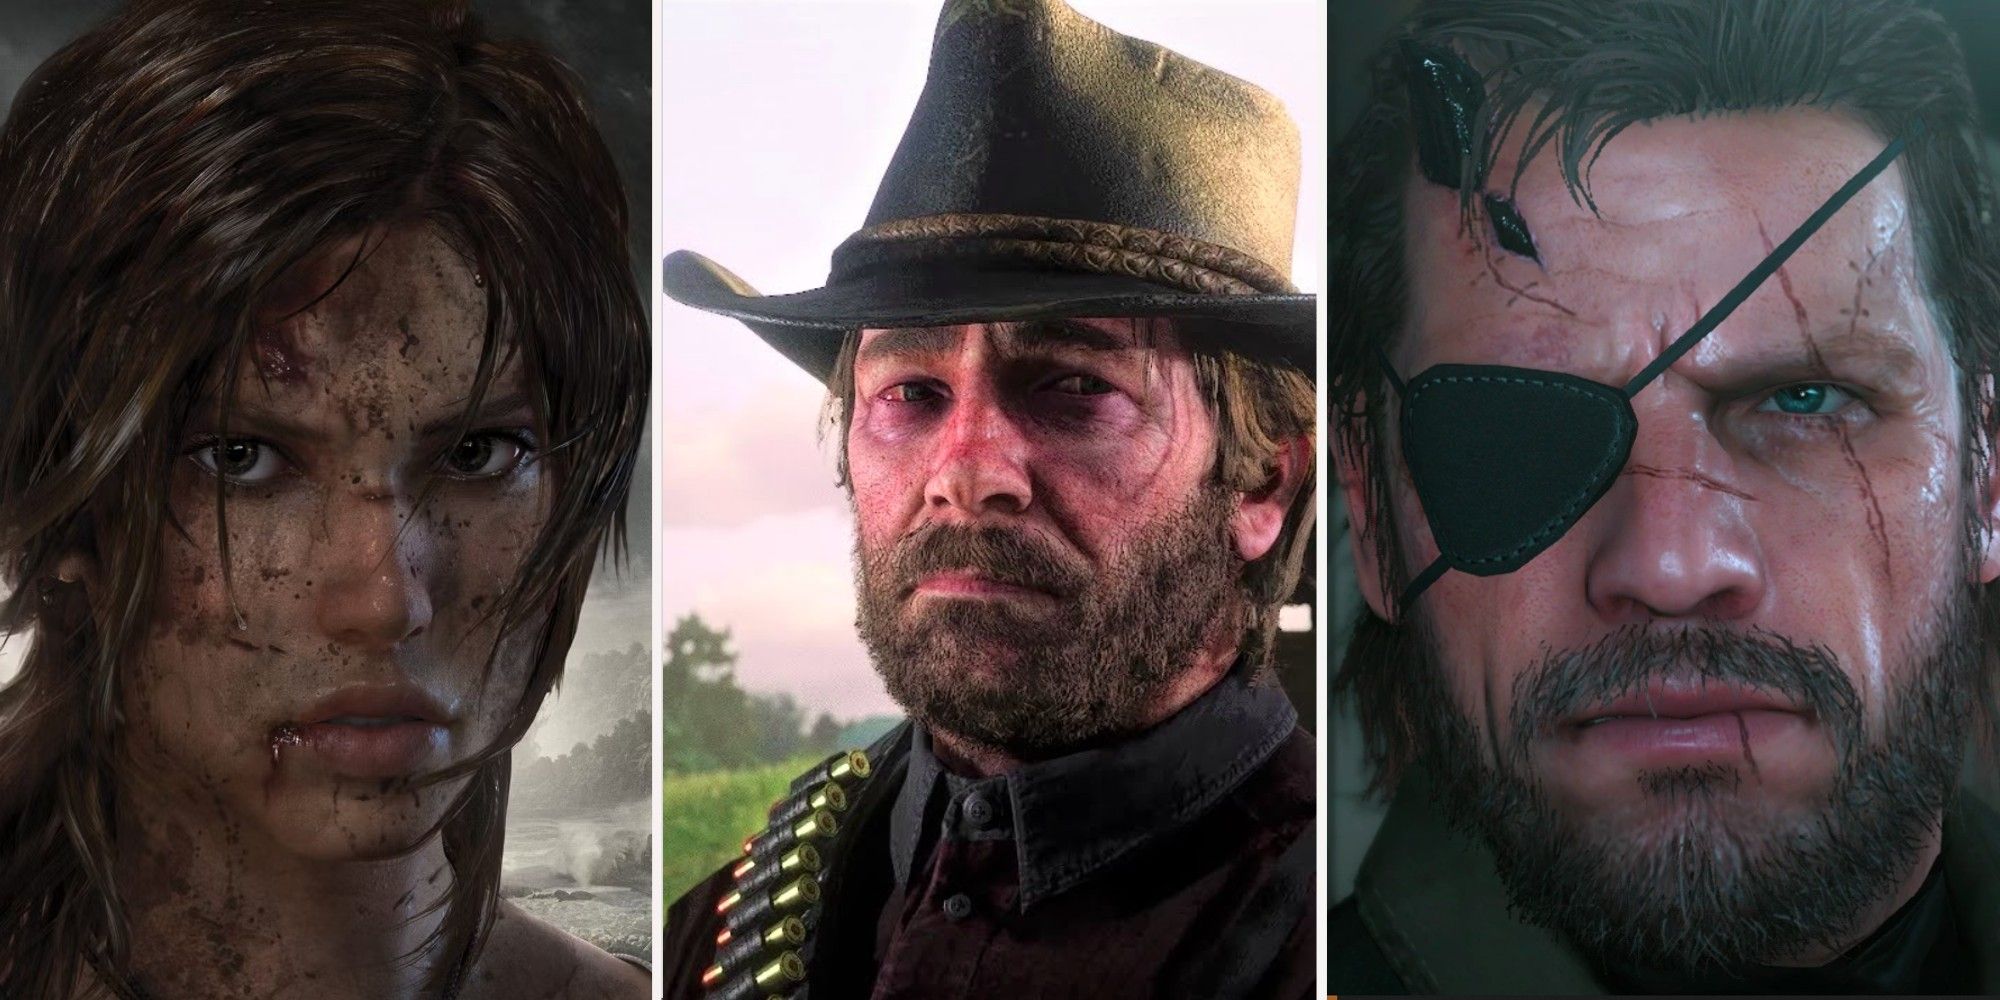 Games With Visual Character Progression - Lara Croft (Tomb Raider 2013), Arthur Morgan (Red Dead Redemption 2), and Venom Snake (Metal Gear Solid 5)-1